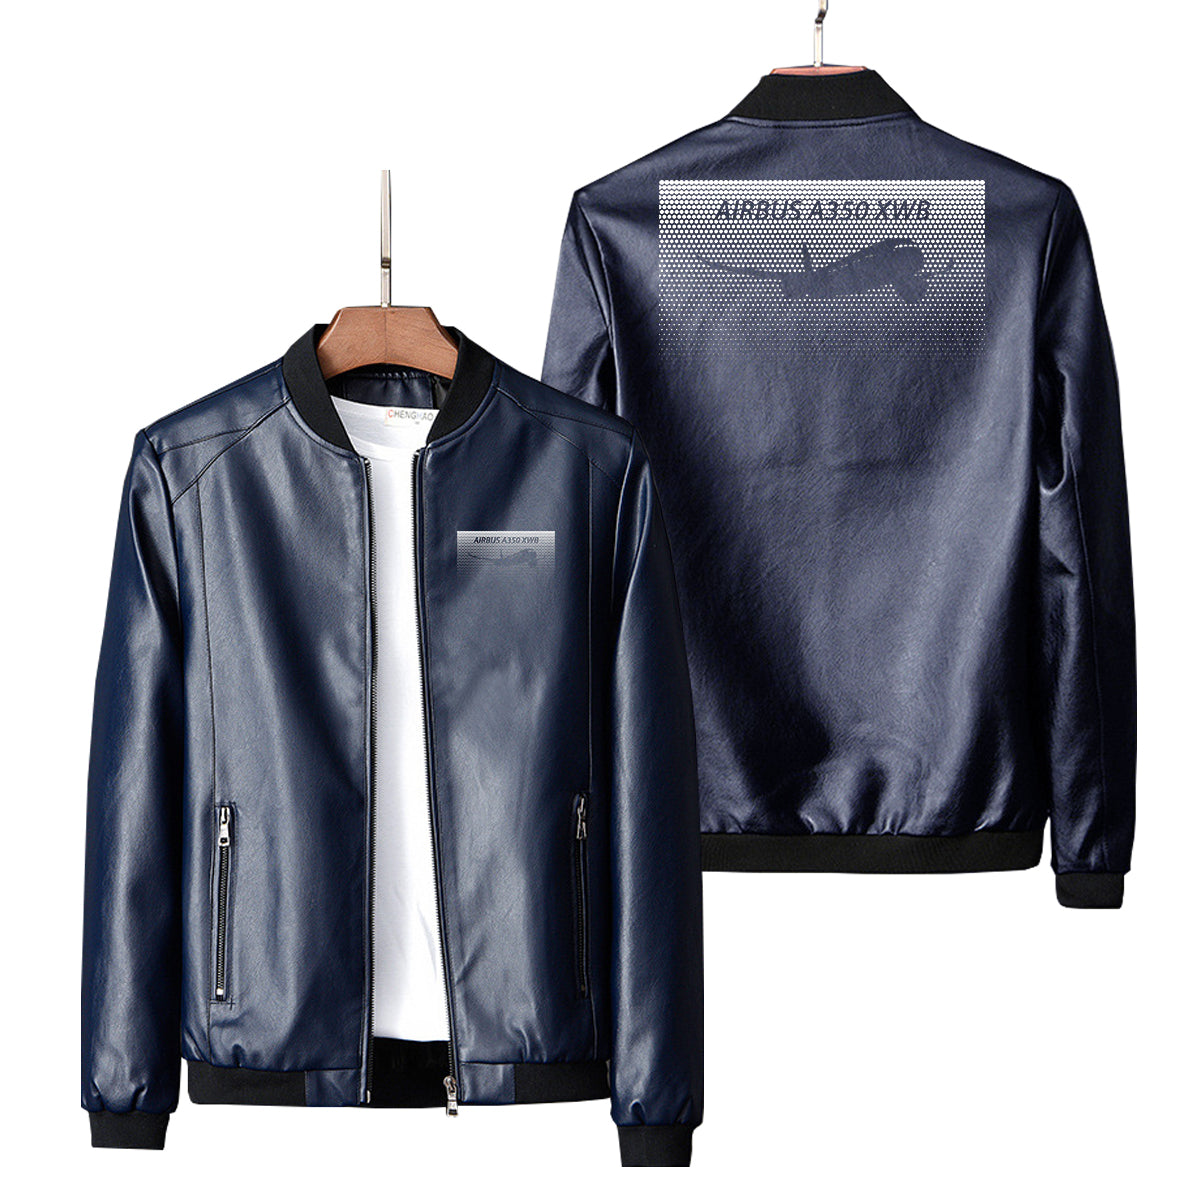 Airbus A350XWB & Dots Designed PU Leather Jackets